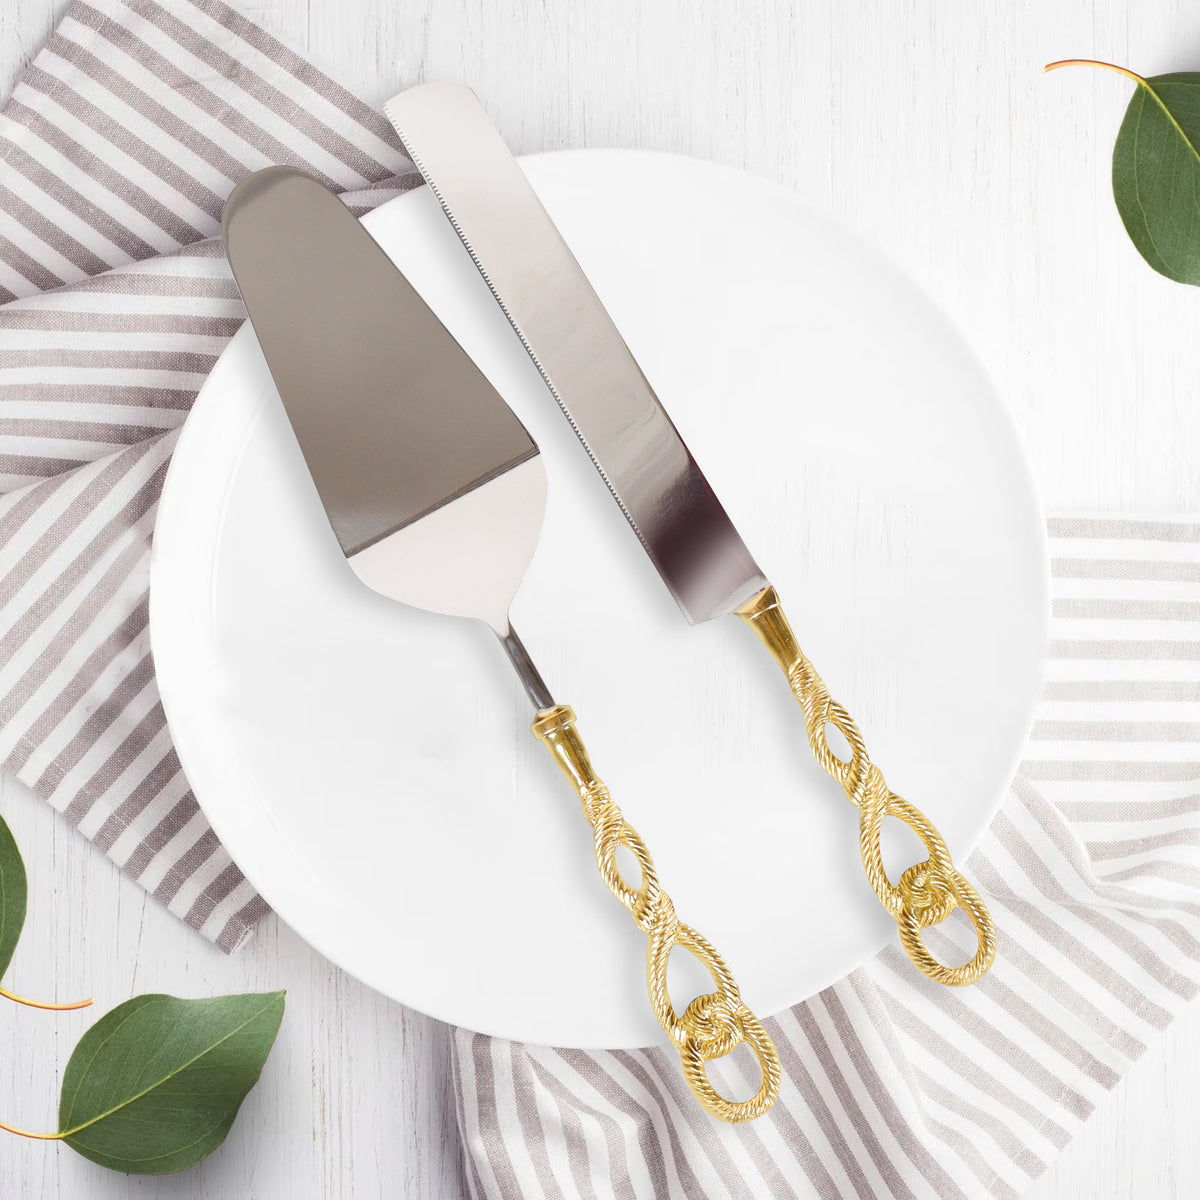 Stainless Steel and Brass Cake Server Set - MD